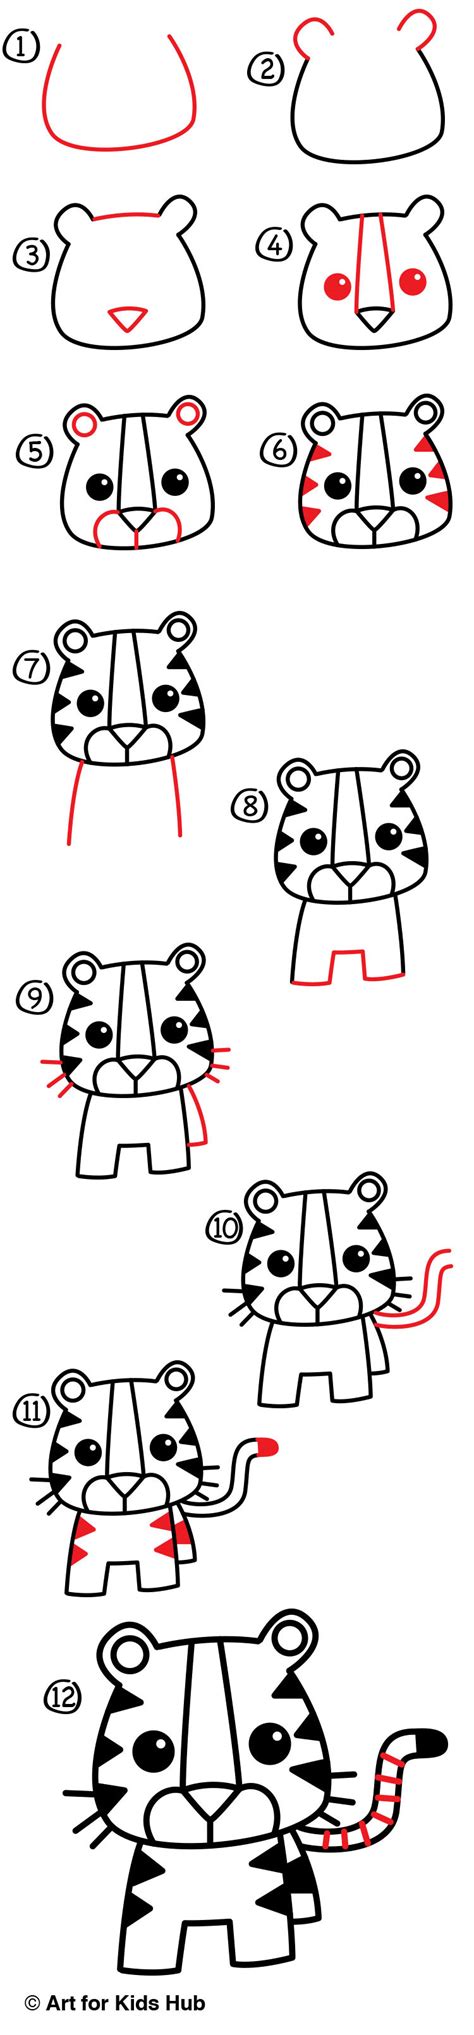 Tiger drawing for beginner#tiger_drawing : How To Draw A Cartoon Tiger - Art For Kids Hub